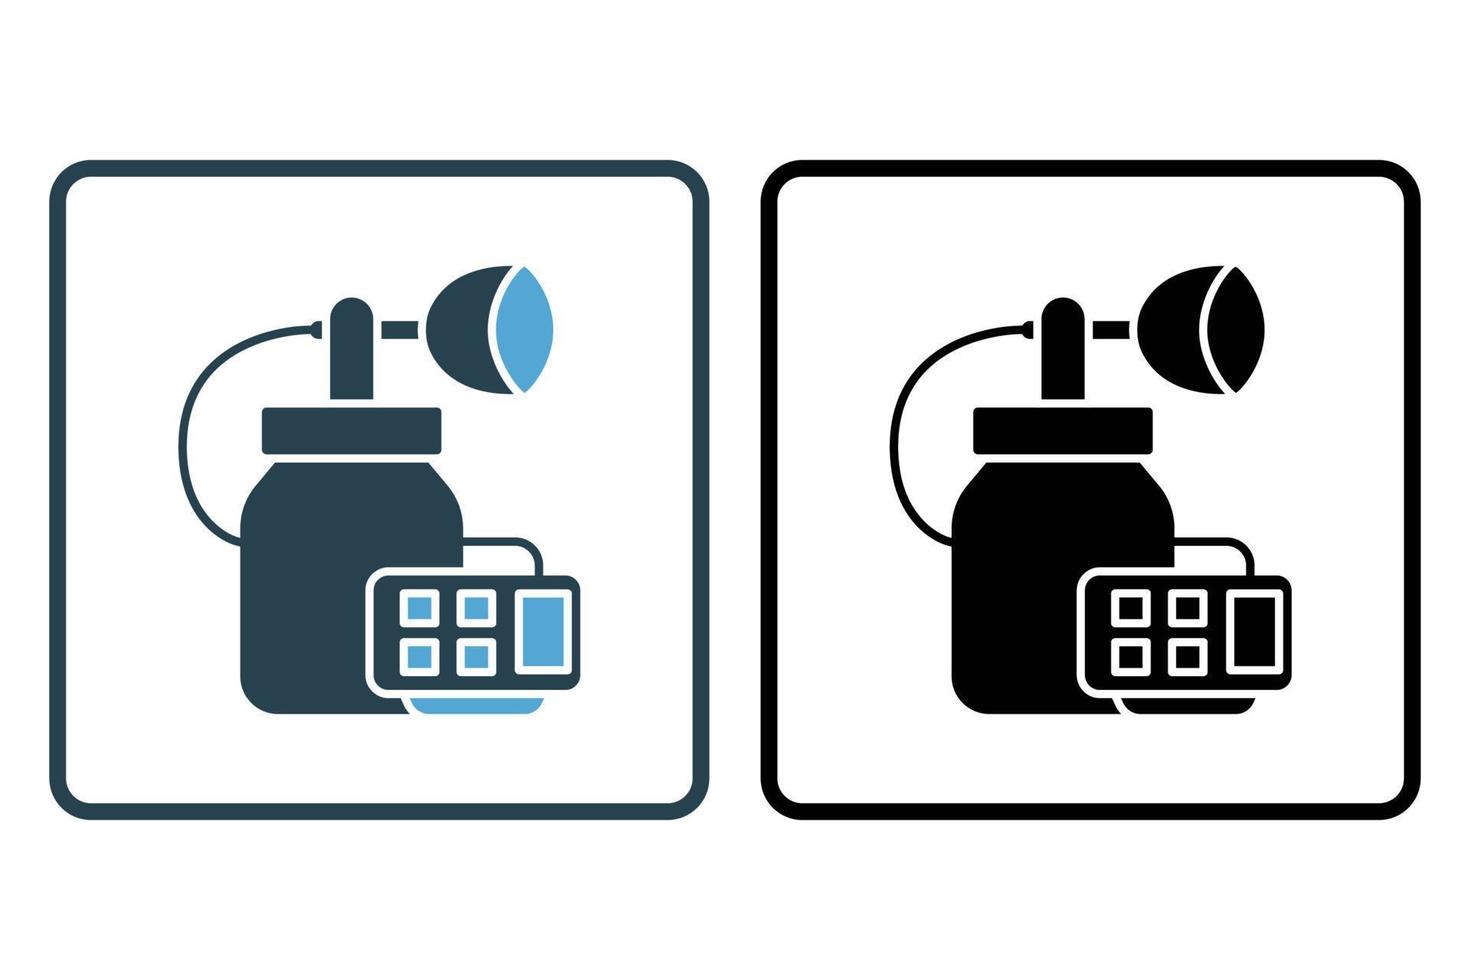 Breast pump icon illustration. icon related to baby care. Solid icon style. Simple vector design editable